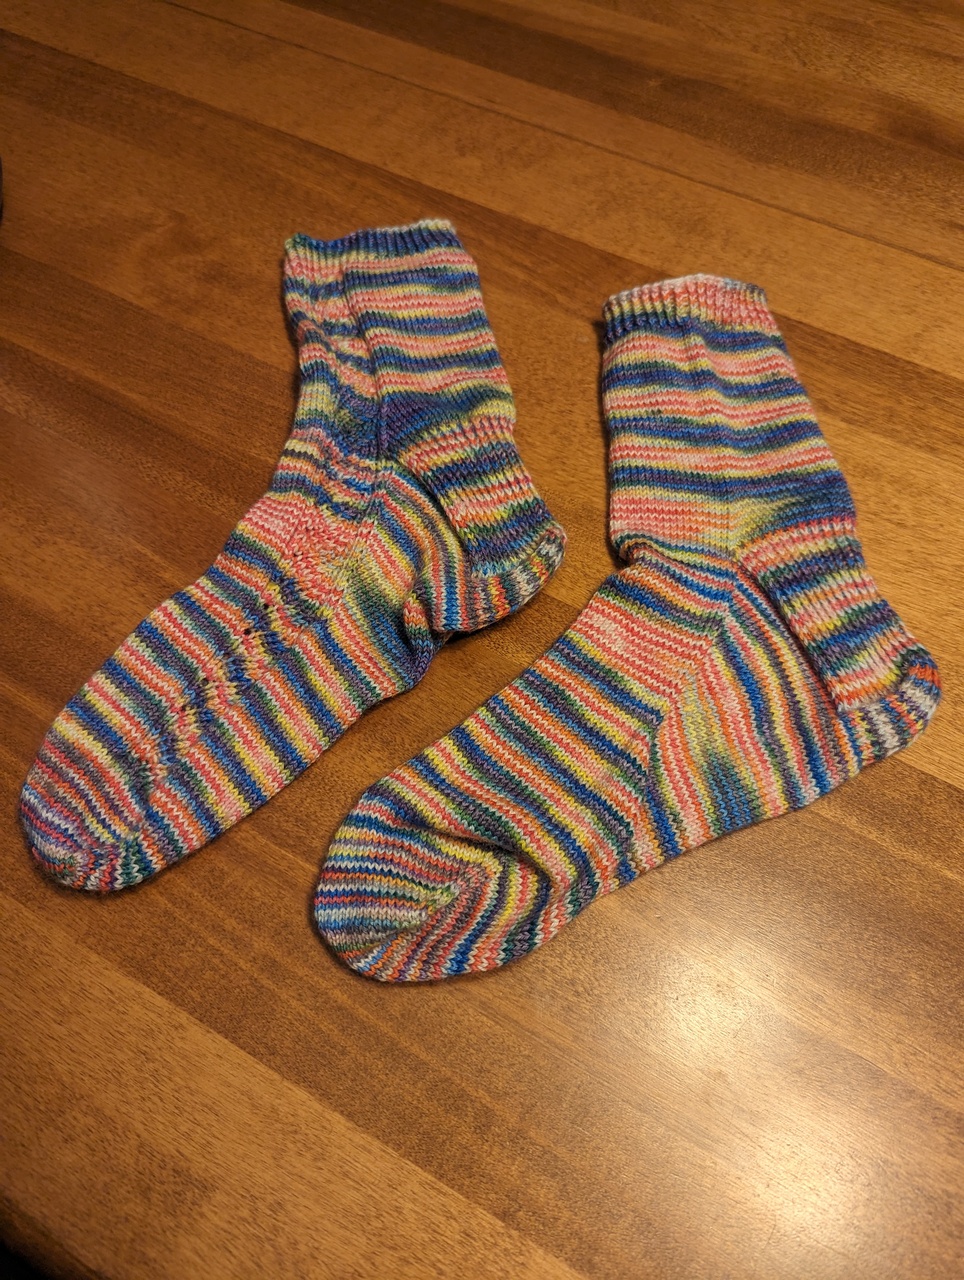 Shot of the completed pair of socks.